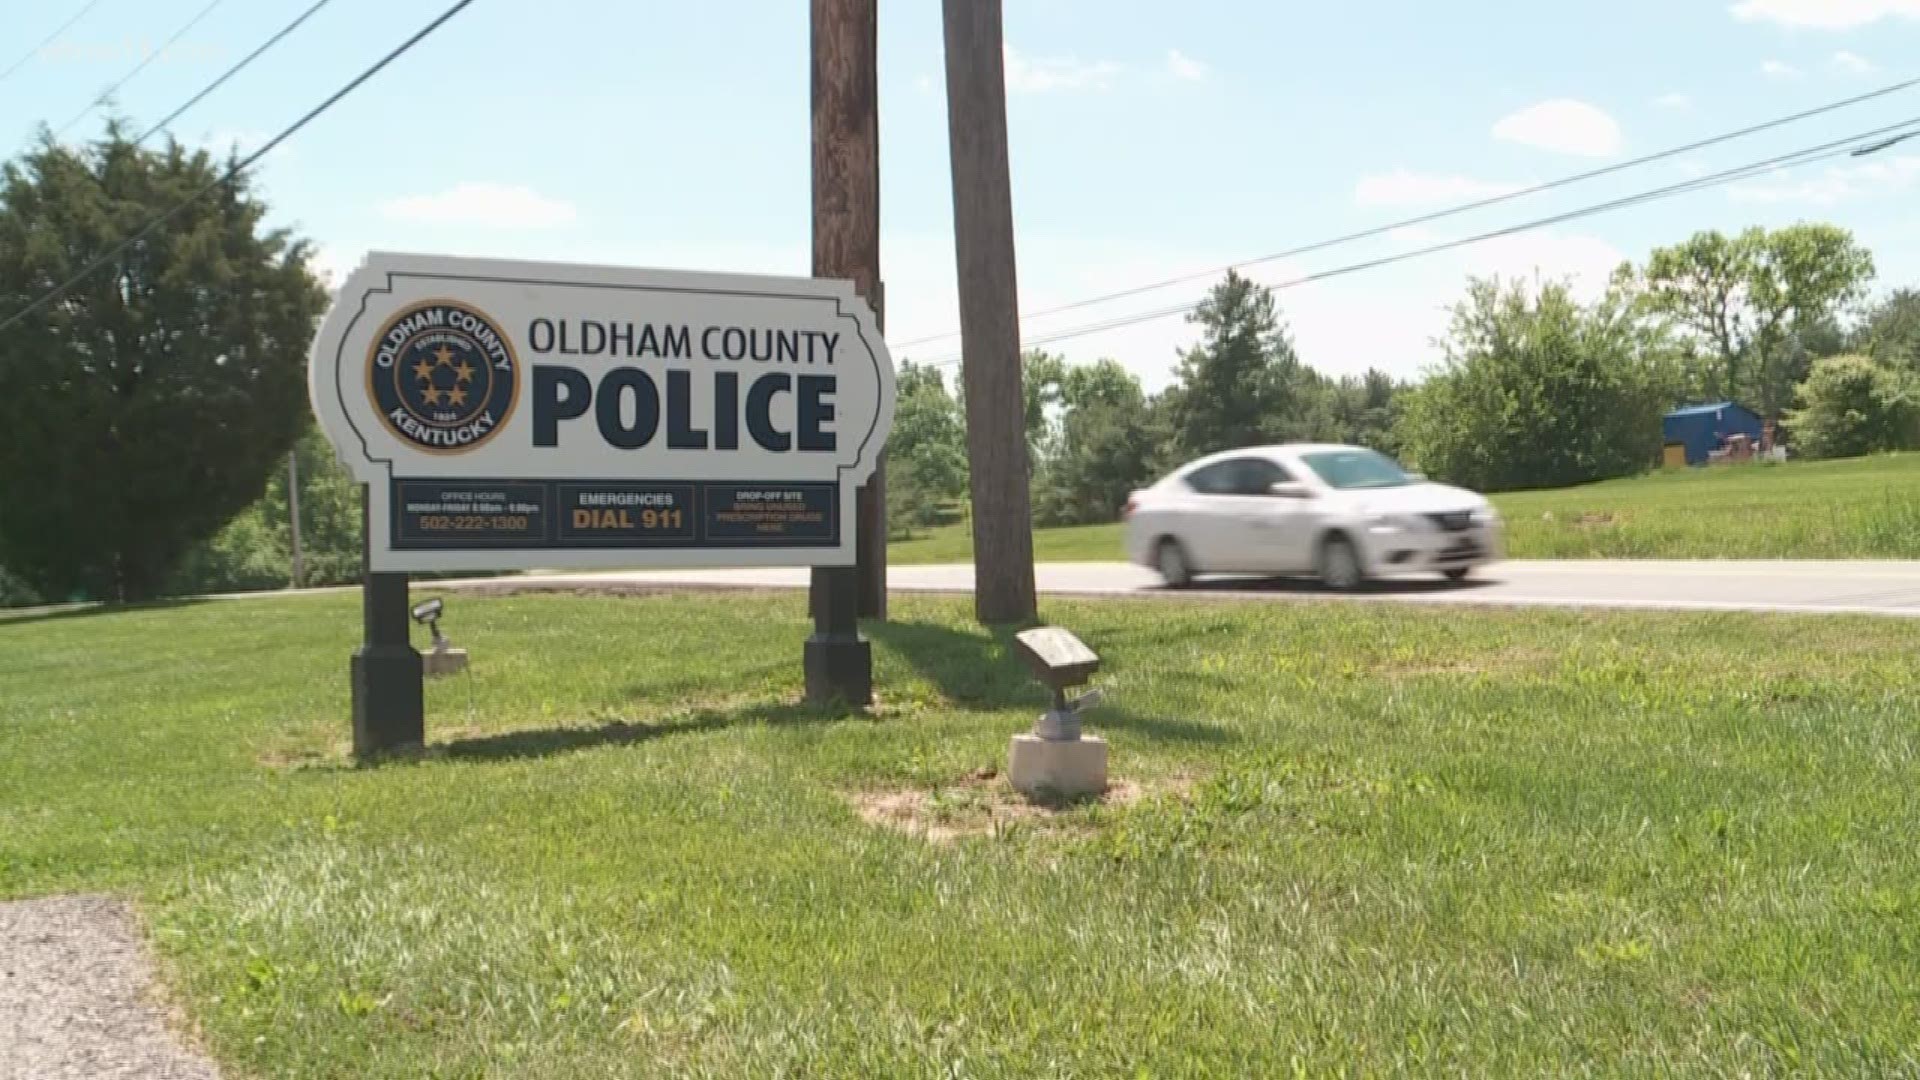 Oldham County and the police department are wrapped up in a battle about age discrimination.